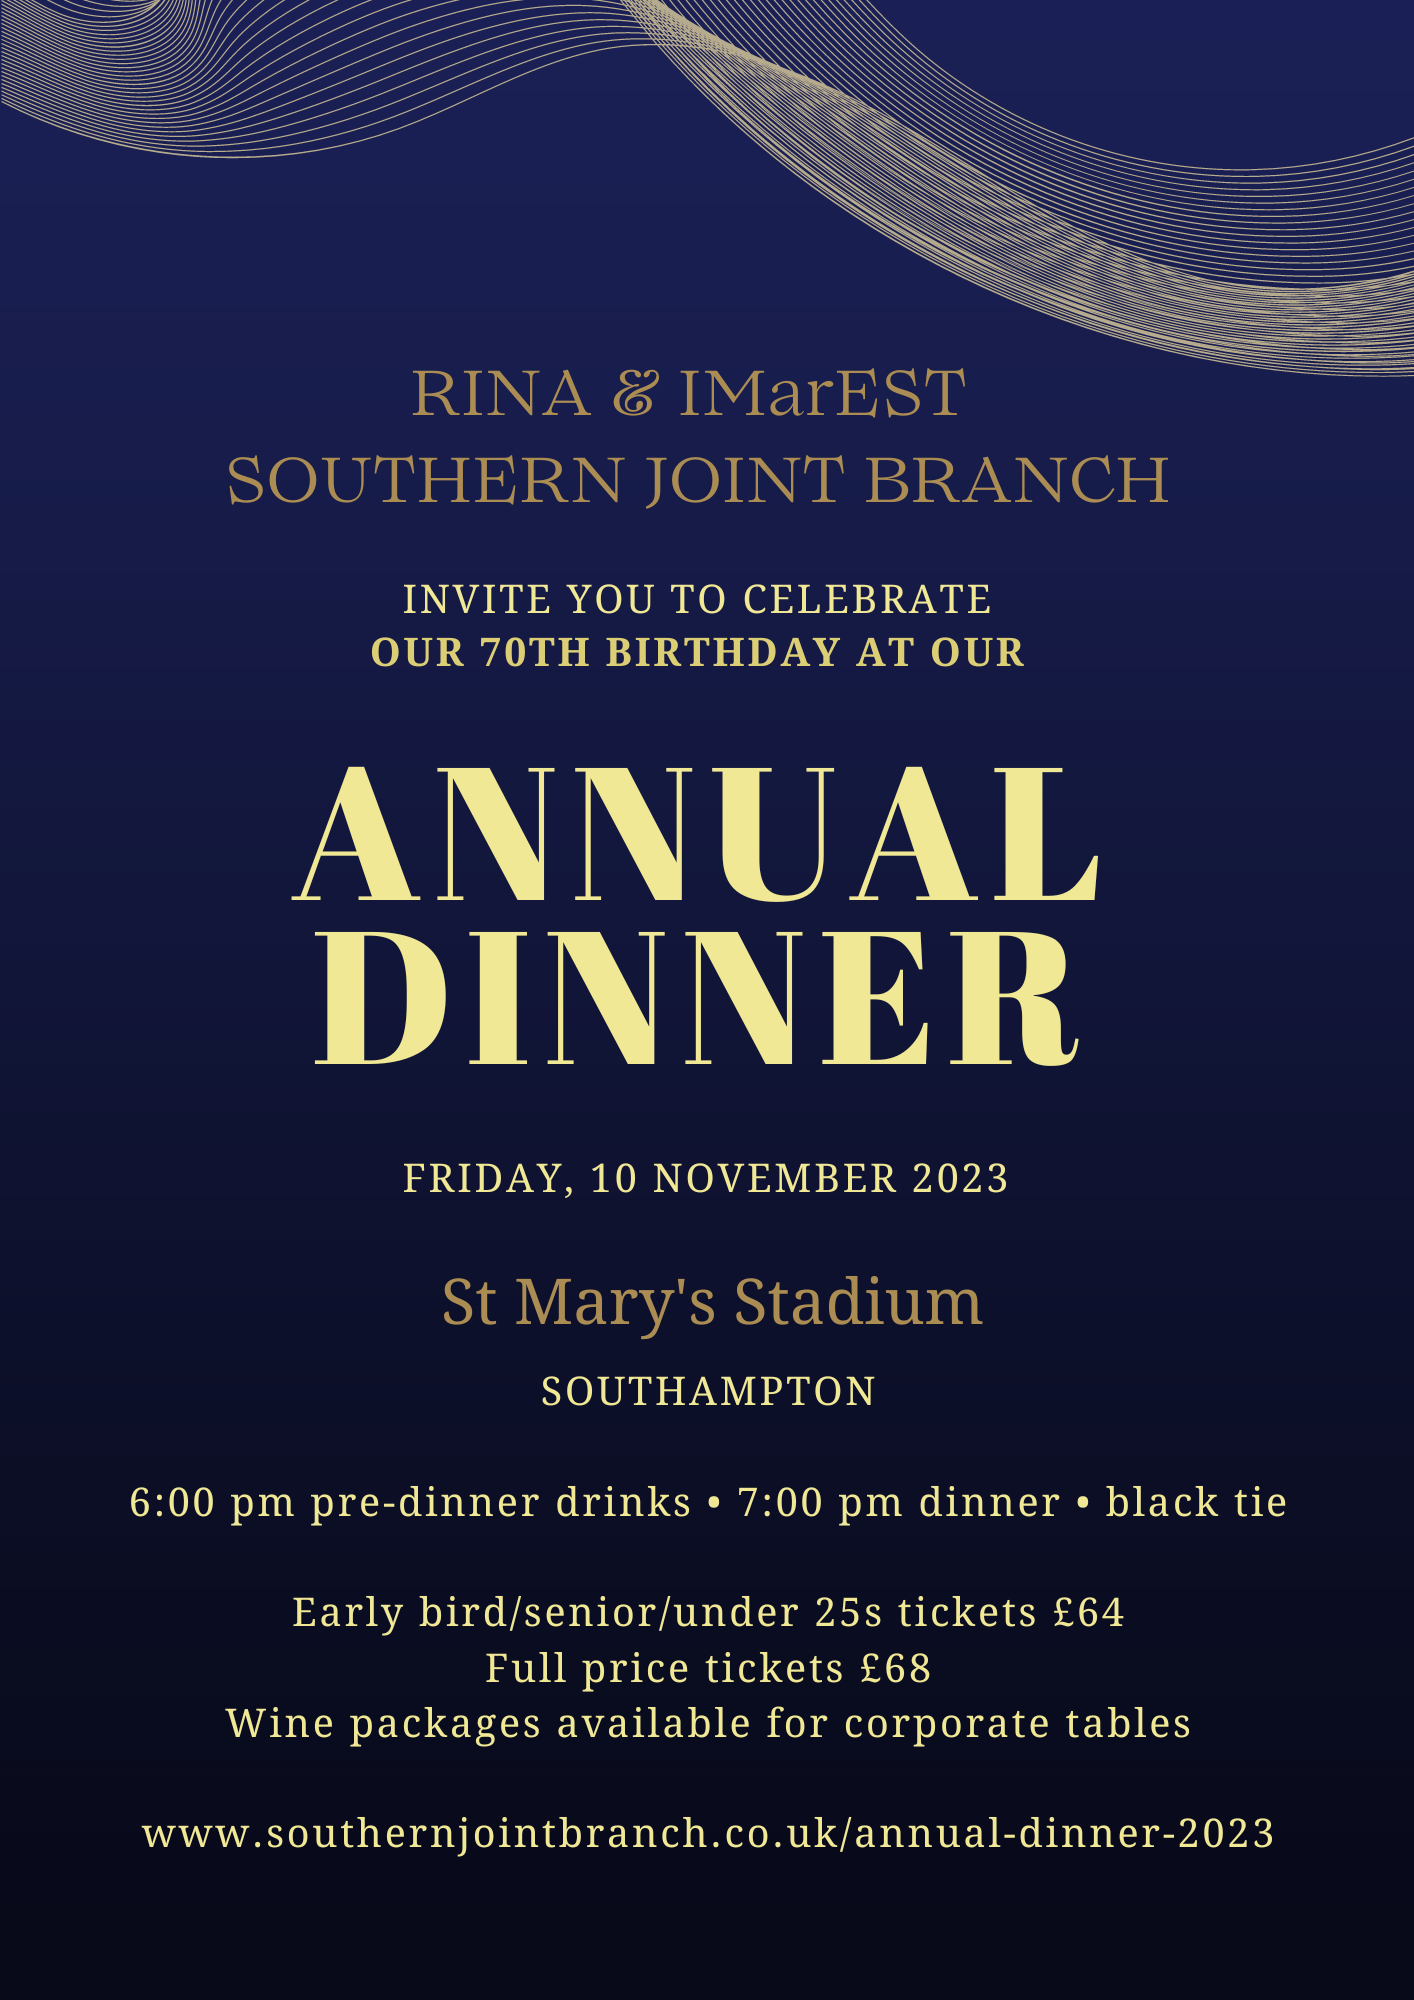 SJB Annual Dinner 2023 (003).png